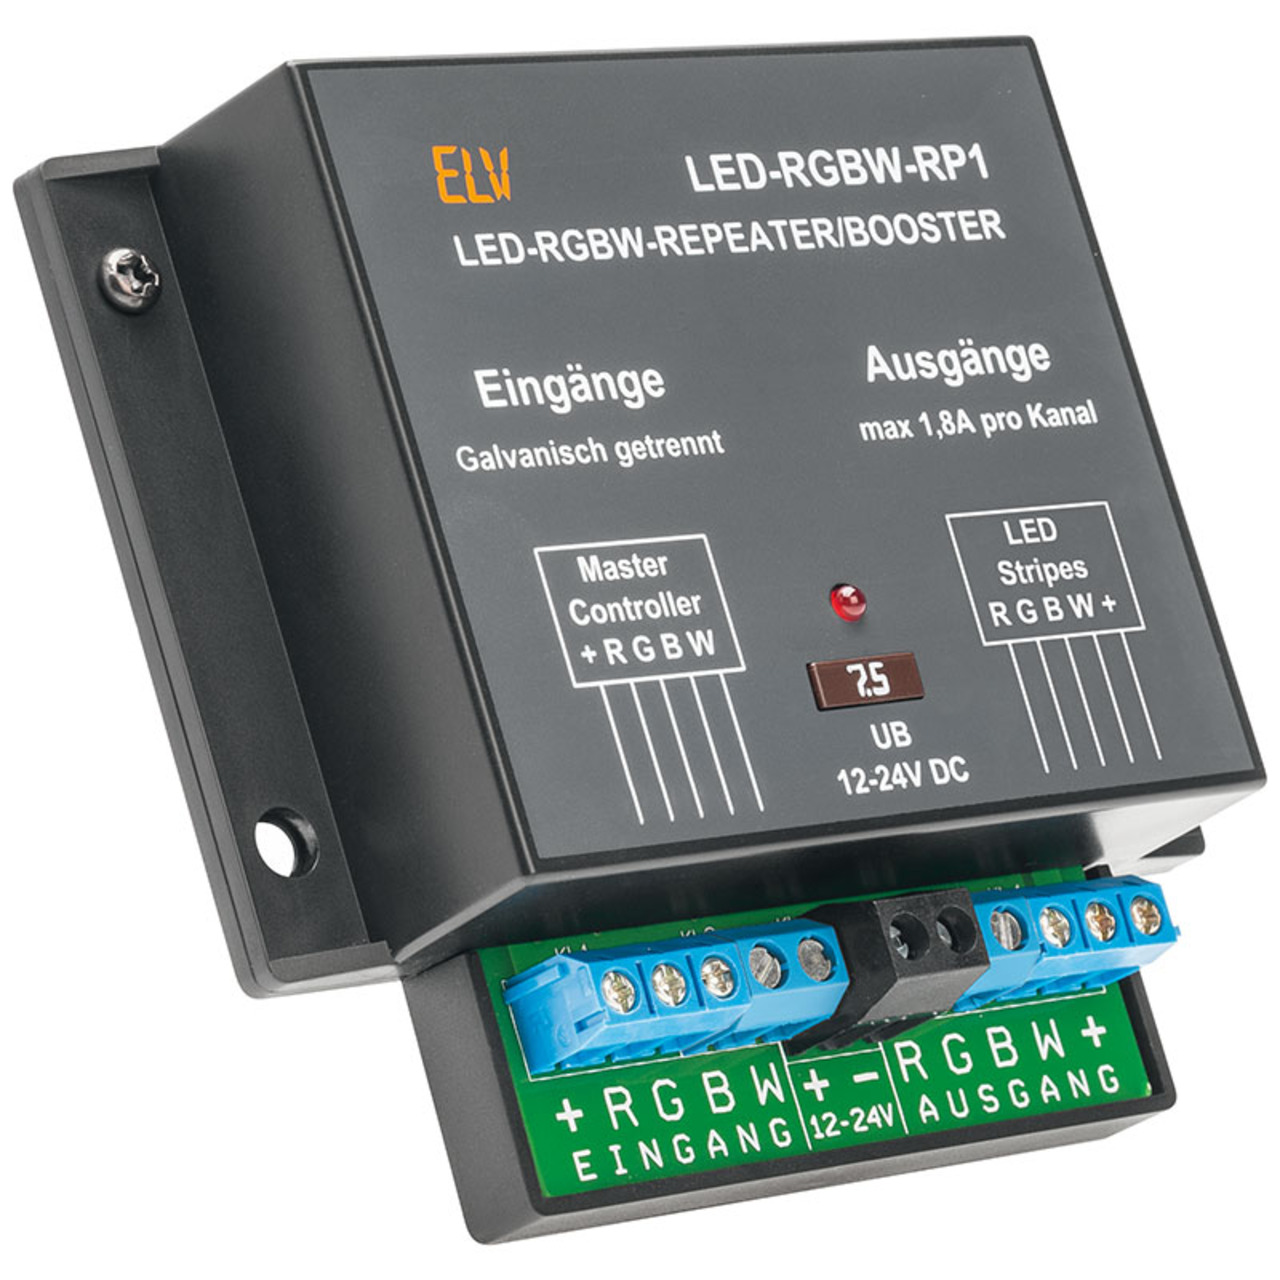 ELV Bausatz LED-RGBW-Repeater-Booster